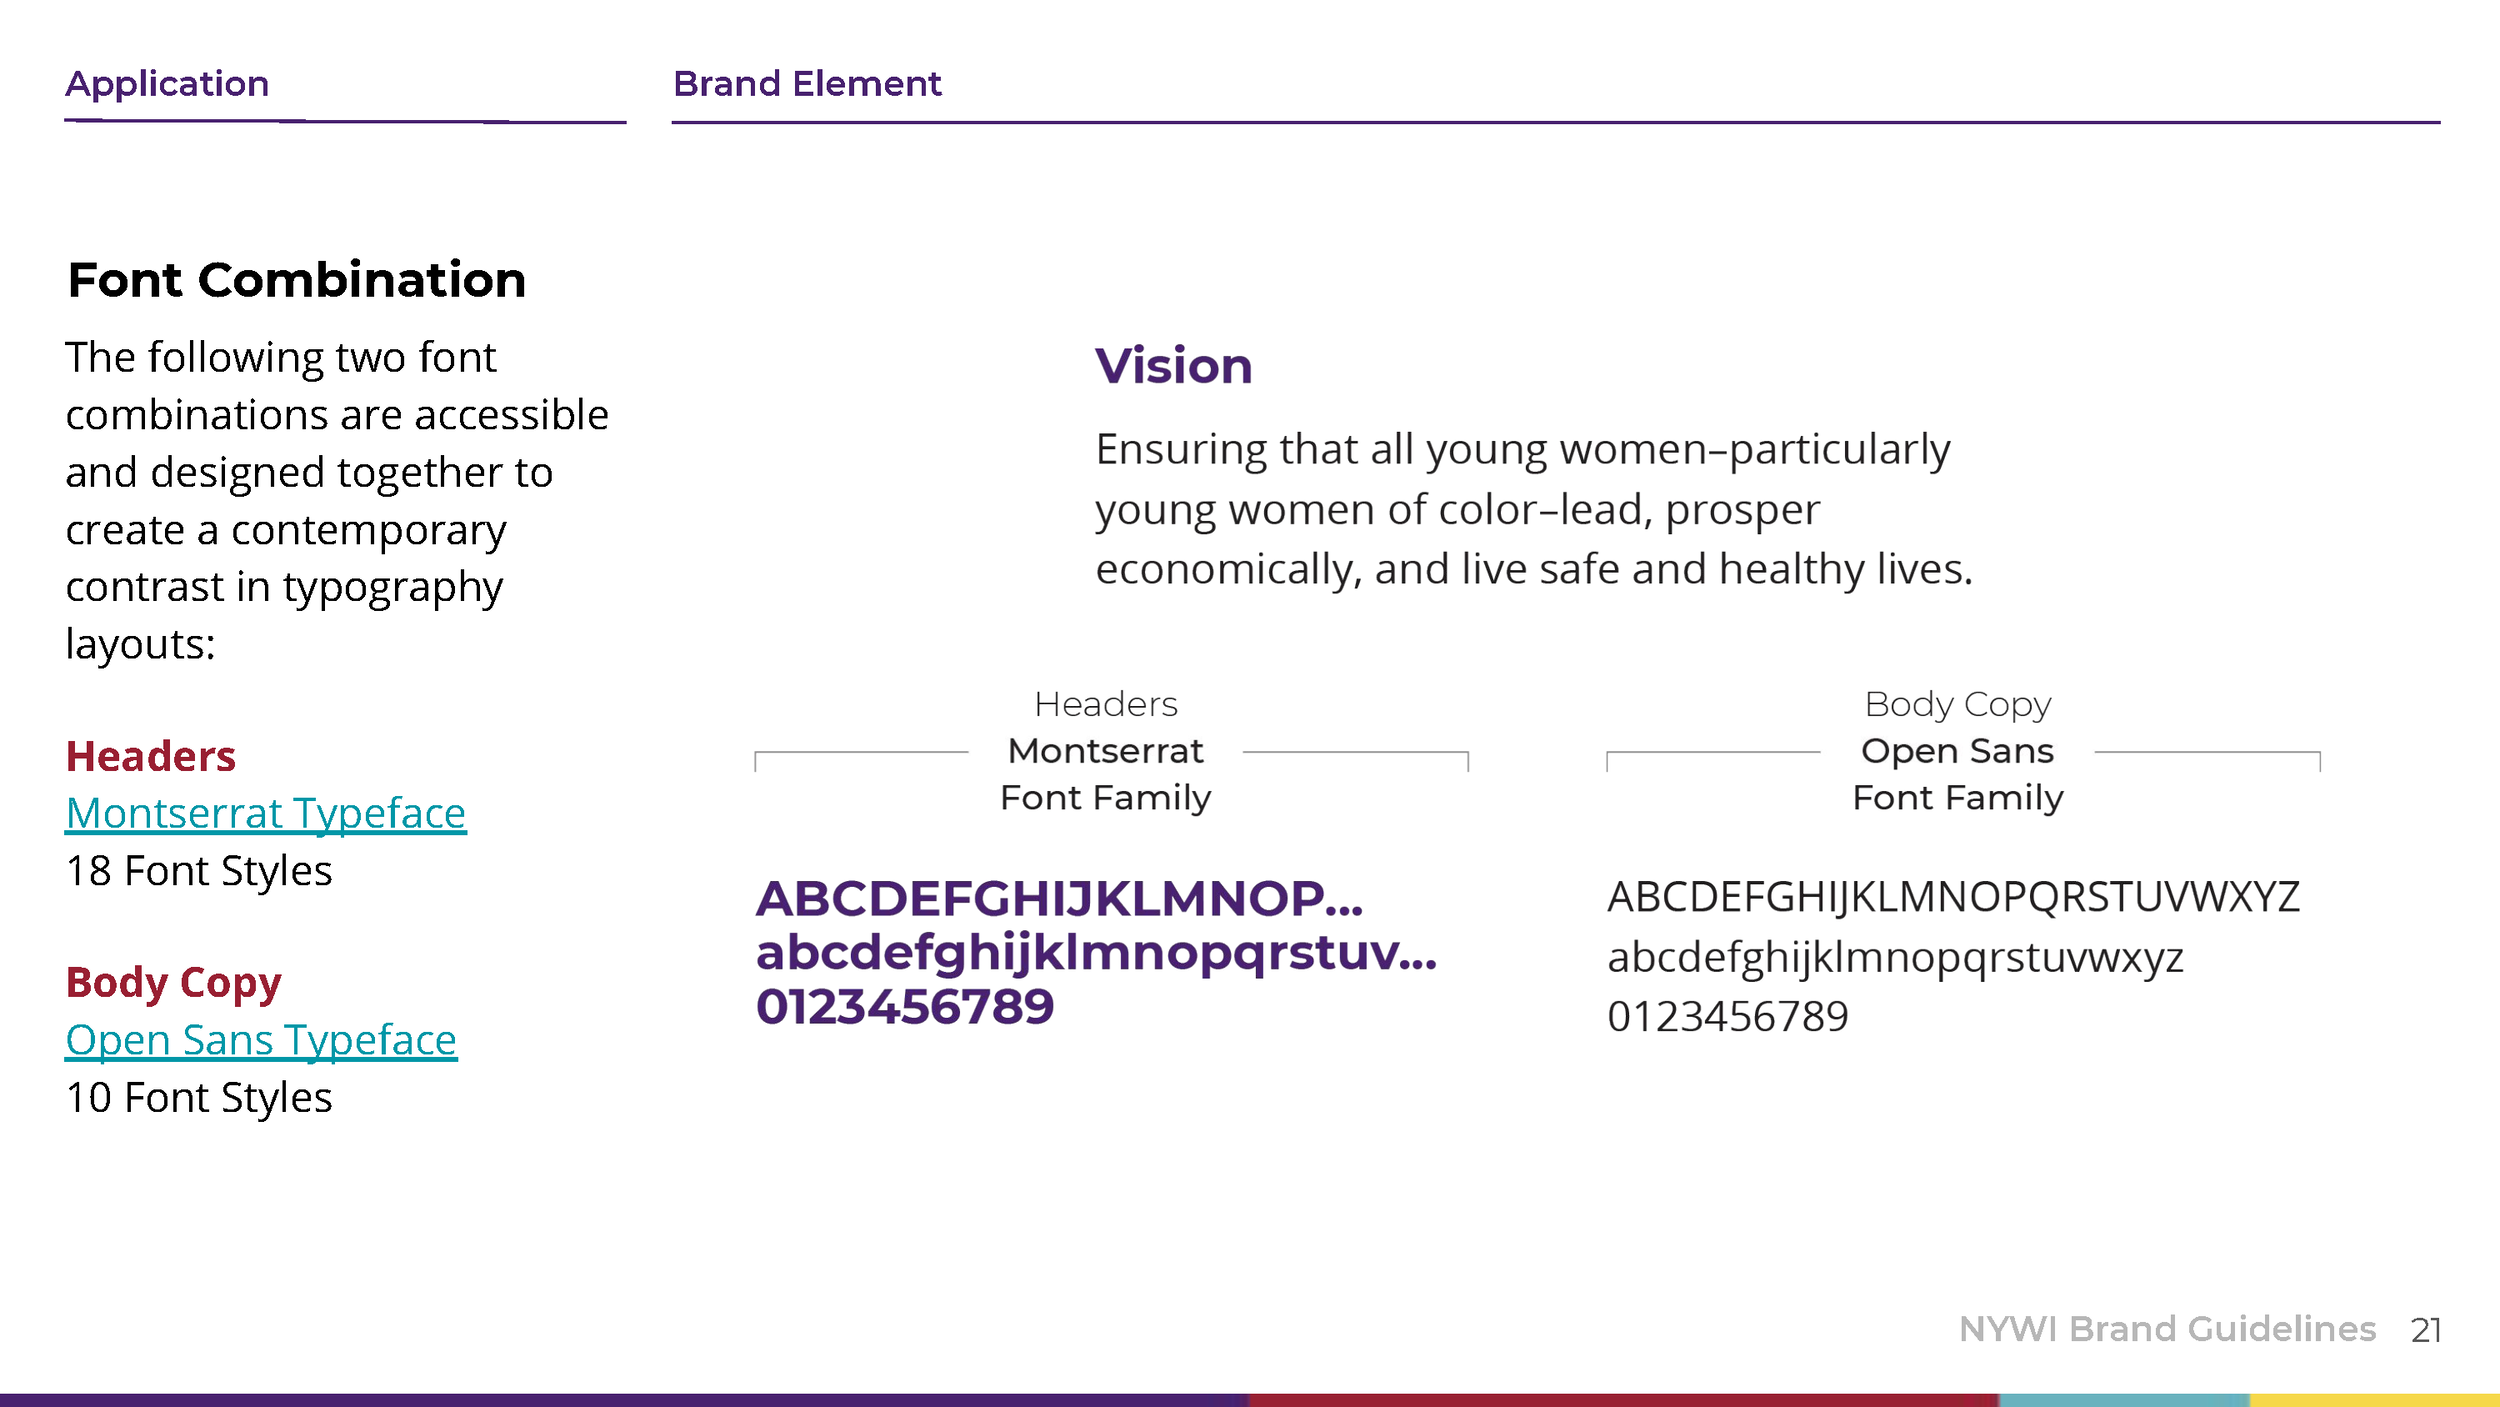 National YWI Brand Guidelines_Page_21.png